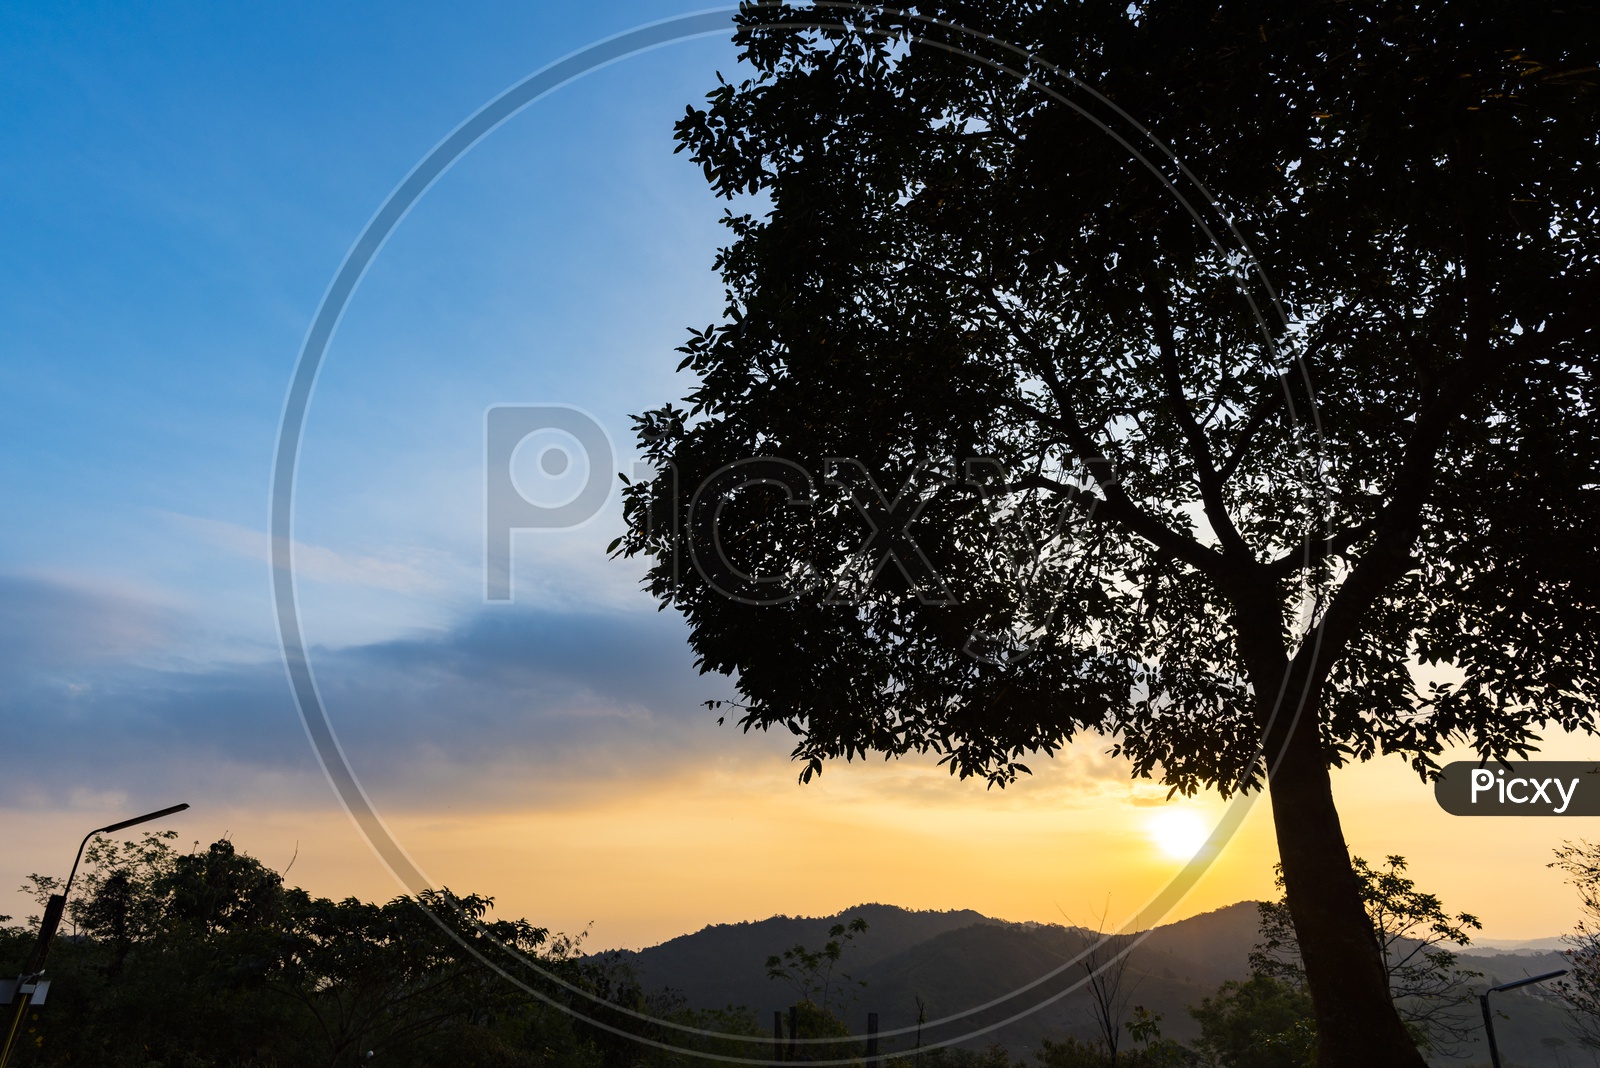 Silhouette Of Tree over Blue Hour Sky in Background